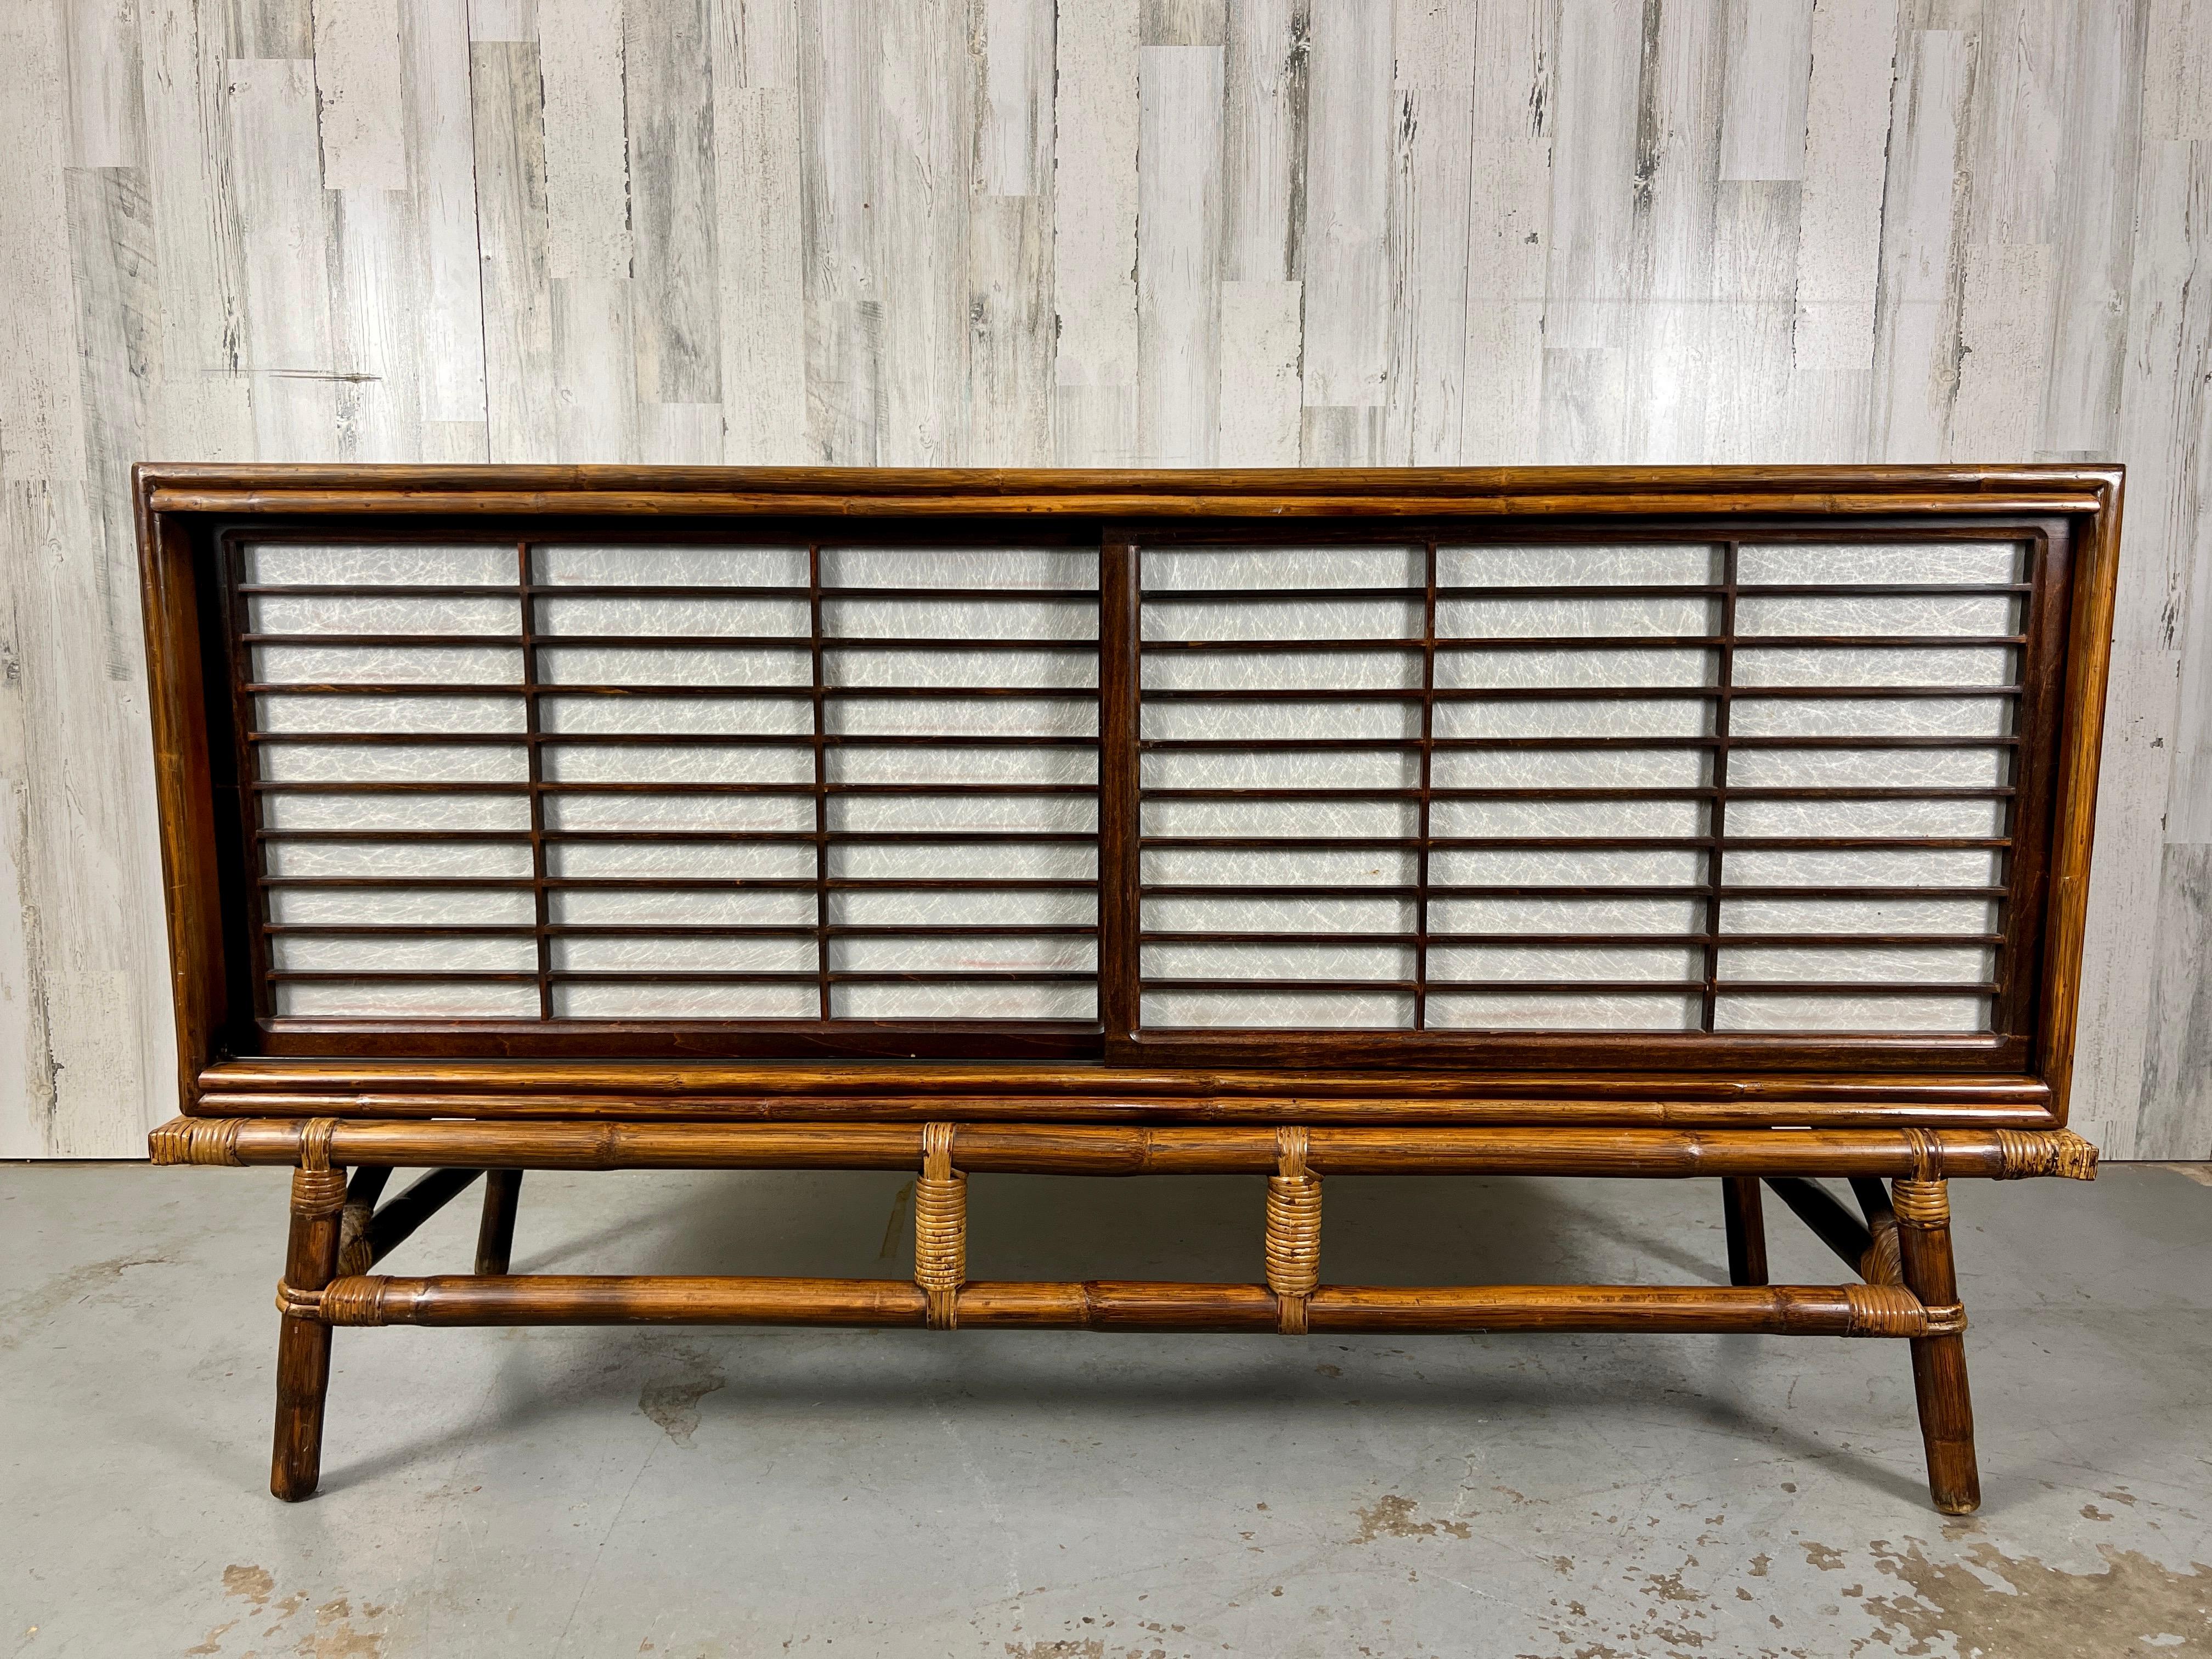 Ficks reed rattan & oak credenza with rice paper front sliding doors.